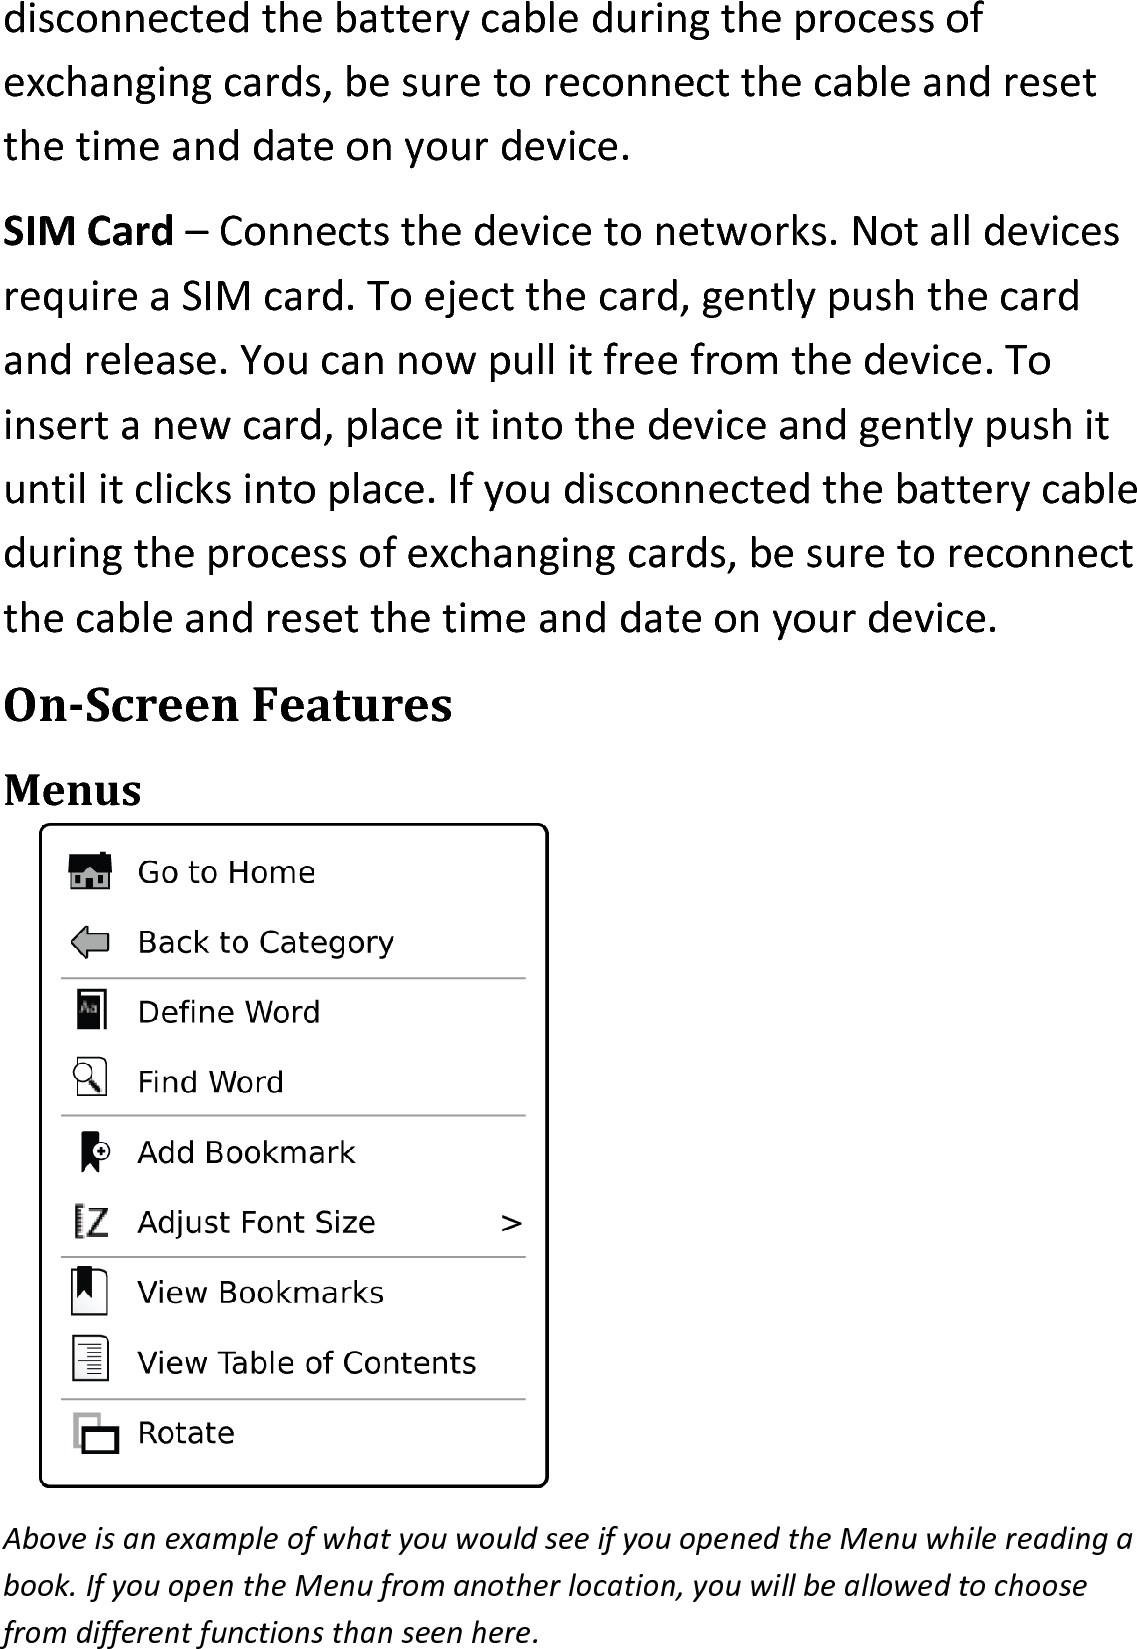 disconnected the battery cable during the process of exchanging cards, be sure to reconnect the cable and reset the time and date on your device.SIM Card – Connects the device to networks. Not all devices require a SIM card. To eject the card, gently push the card and release. You can now pull it free from the device. To insert a new card, place it into the device and gently push it until it clicks into place. If you disconnected the battery cable during the process of exchanging cards, be sure to reconnect the cable and reset the time and date on your device.On-Screen FeaturesMenusAbove is an example of what you would see if you opened the Menu while reading a book. If you open the Menu from another location, you will be allowed to choose from different functions than seen here. 